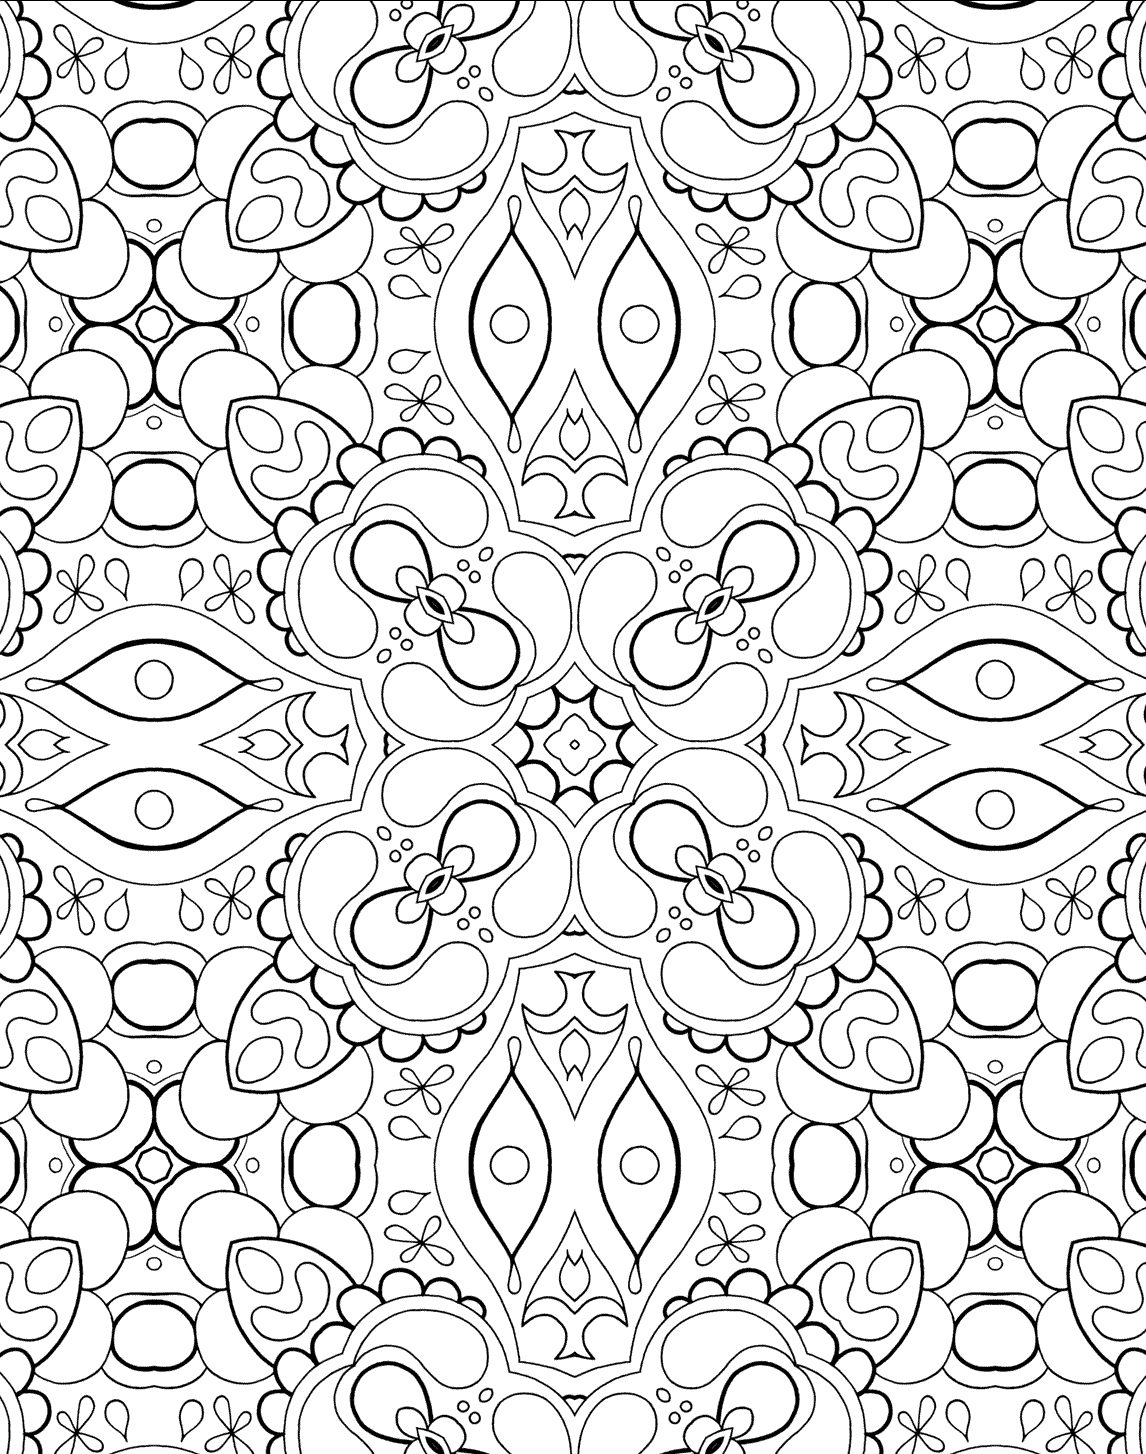 Download Mindfulness Coloring Pages - Best Coloring Pages For Kids